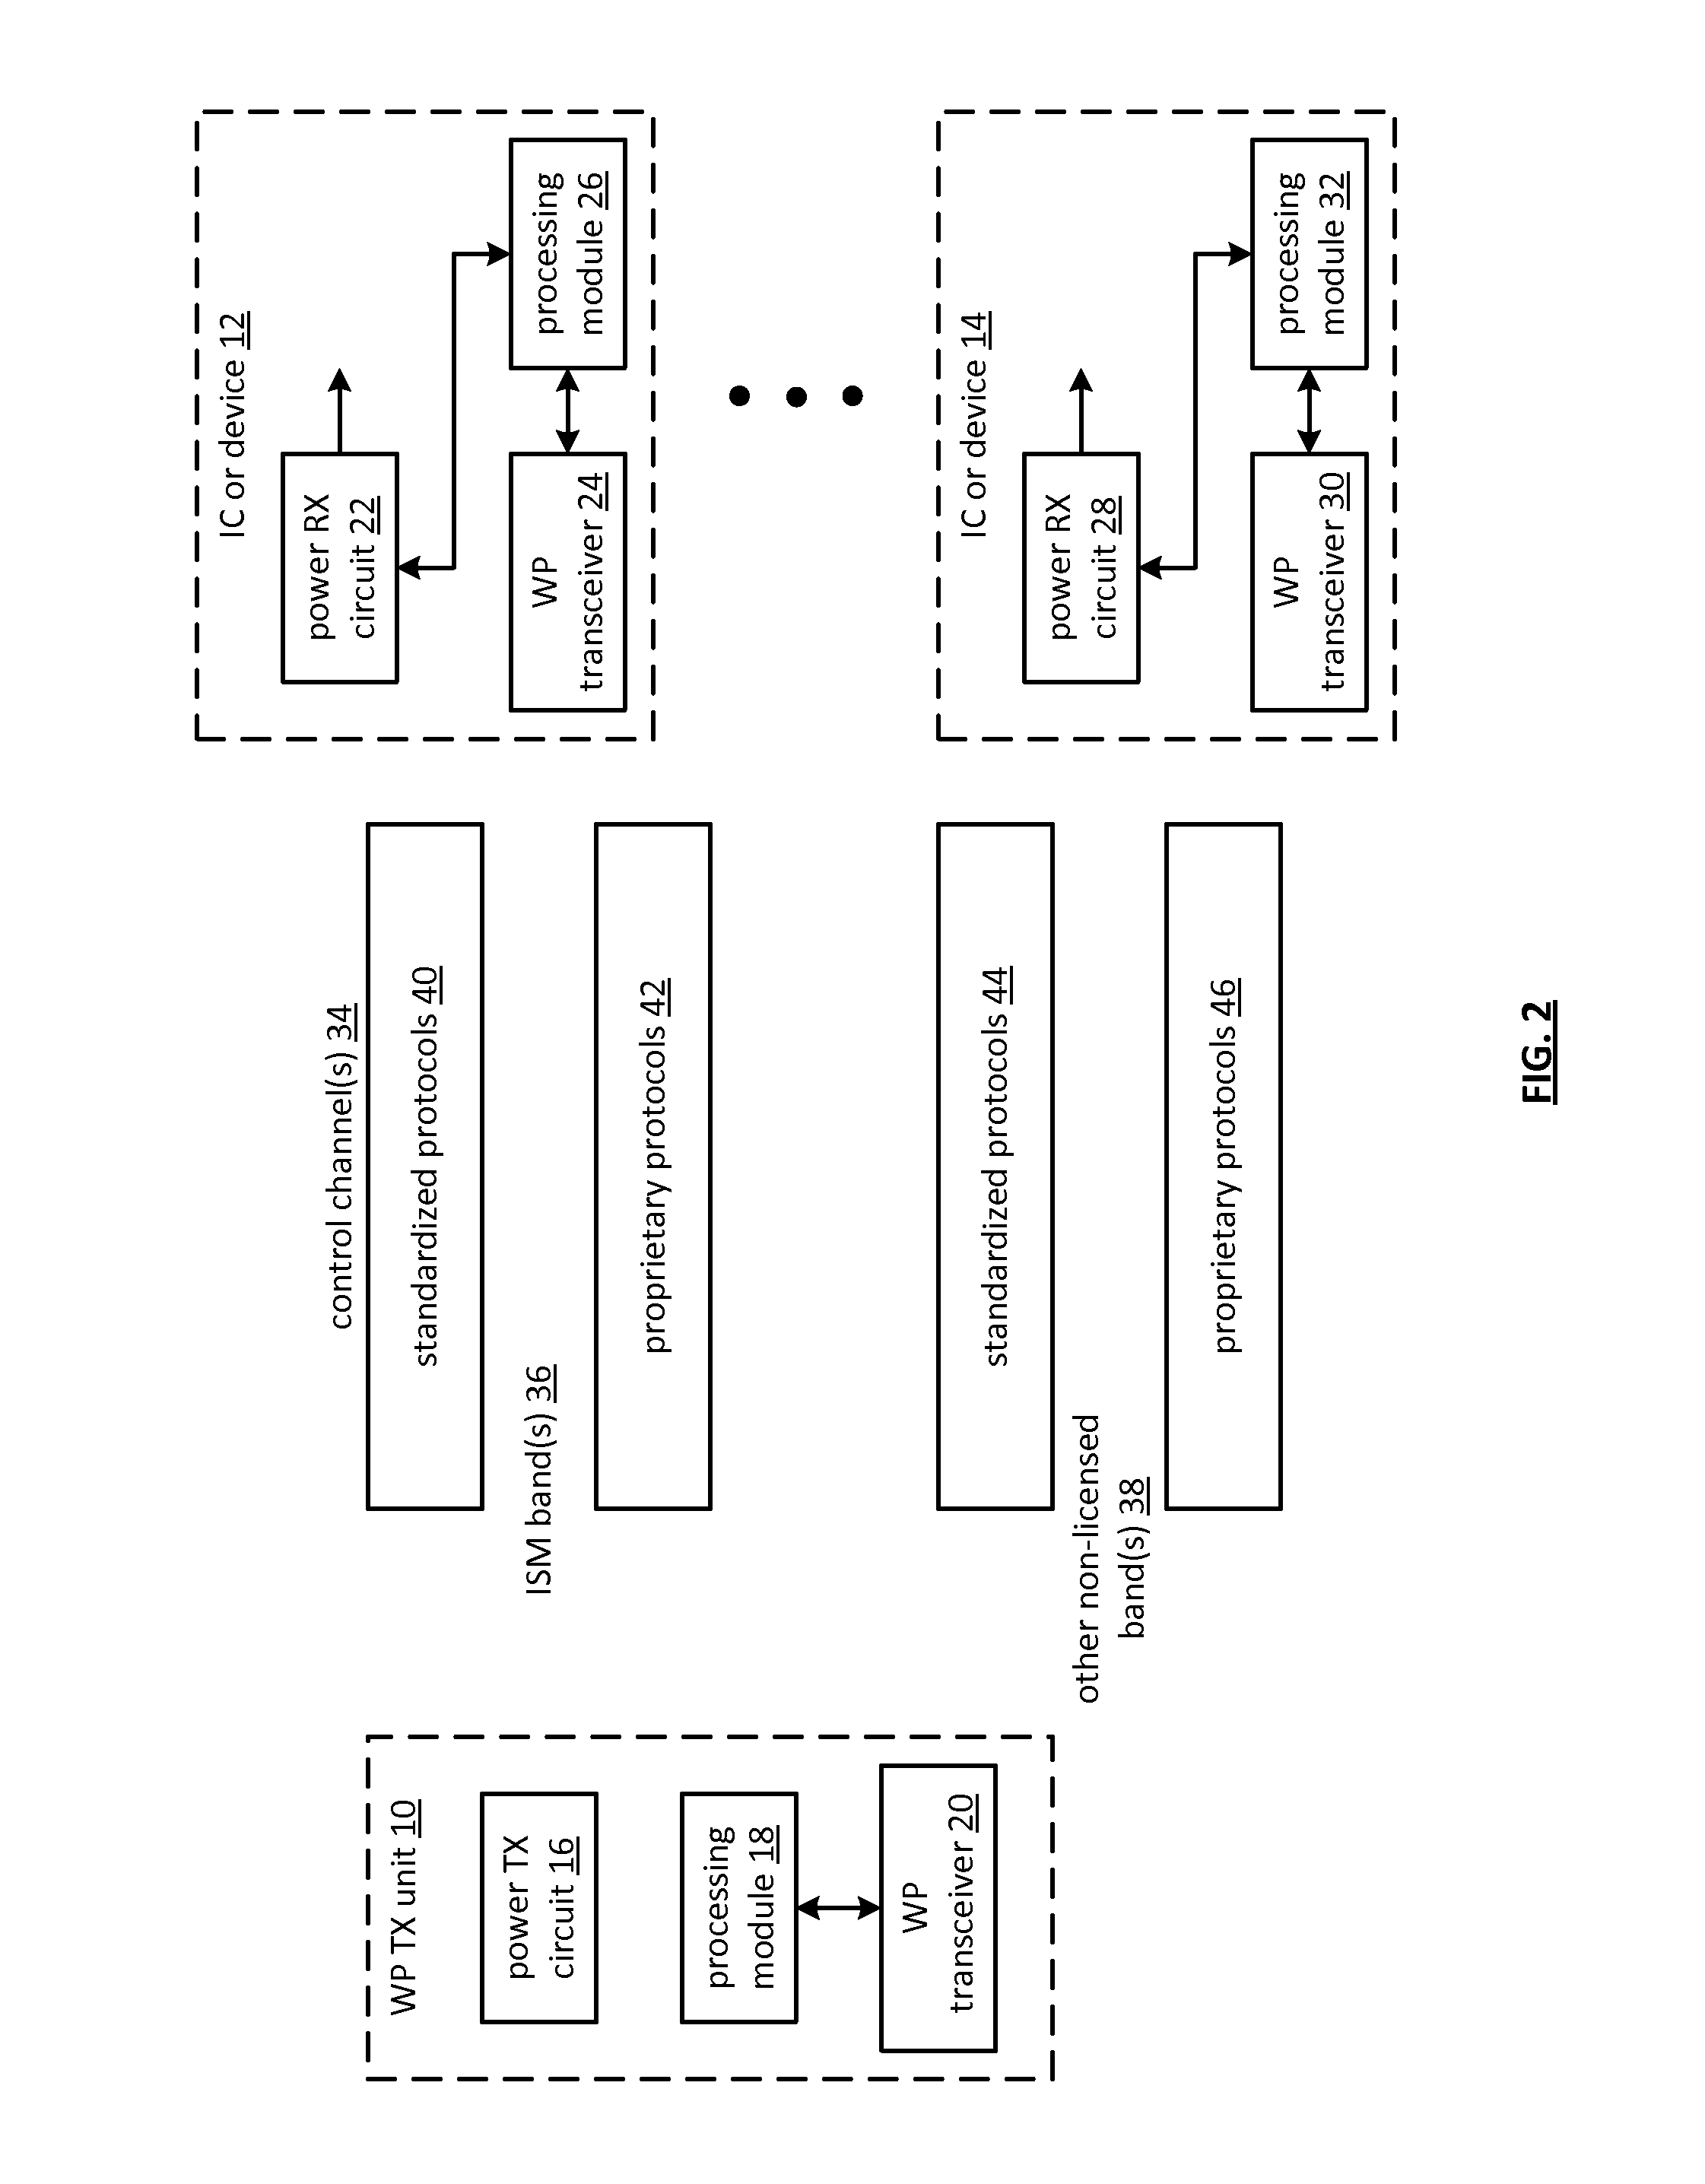 Wireless power circuit board and assembly